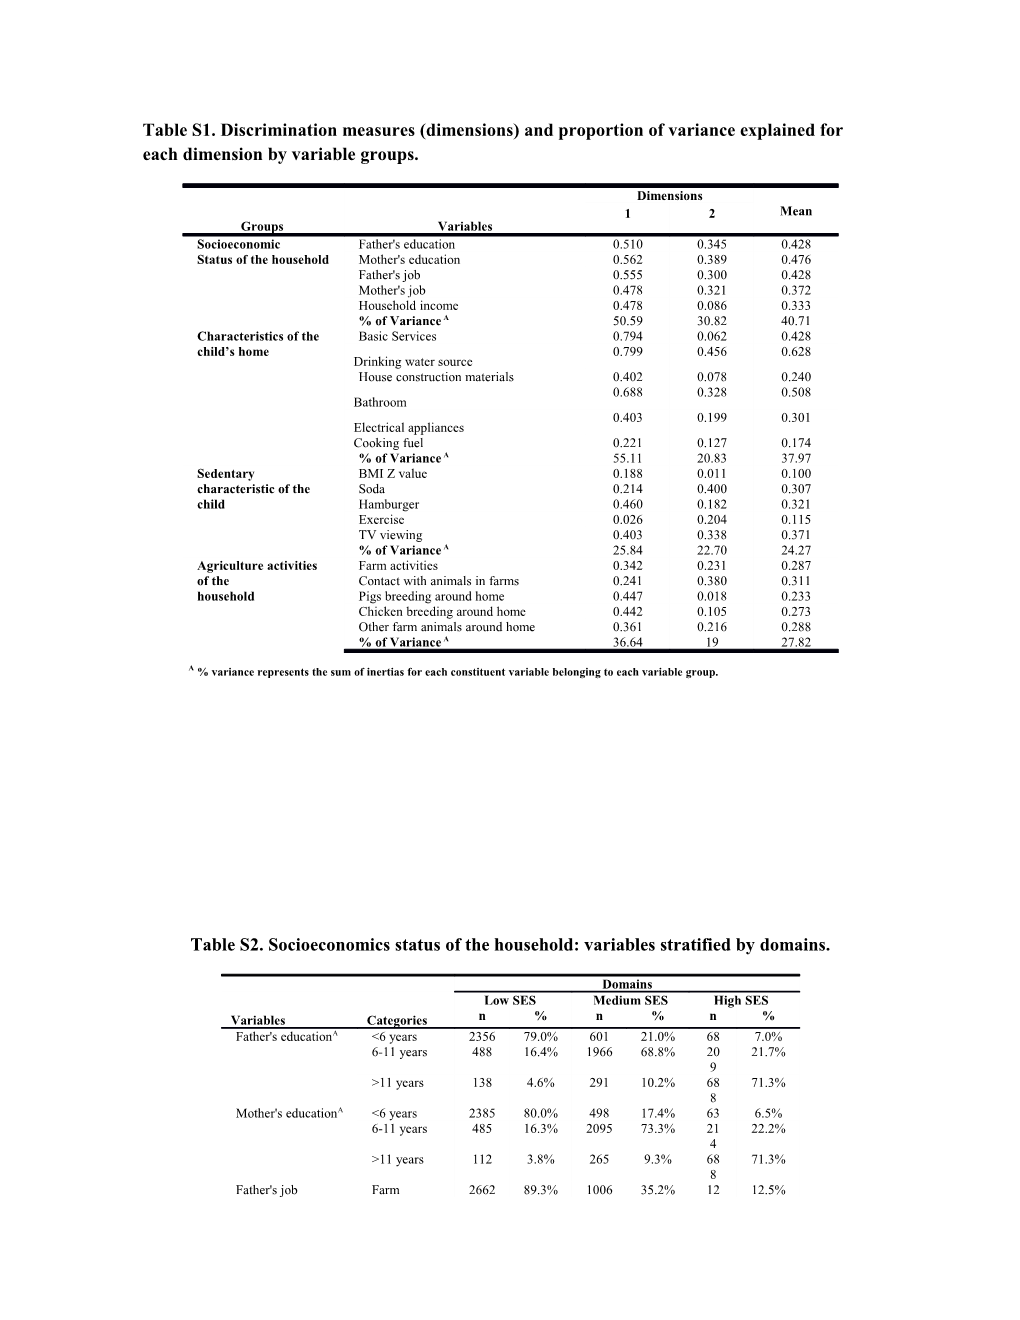 Table S2. Socioeconomics Status of the Household: Variables Stratified by Domains